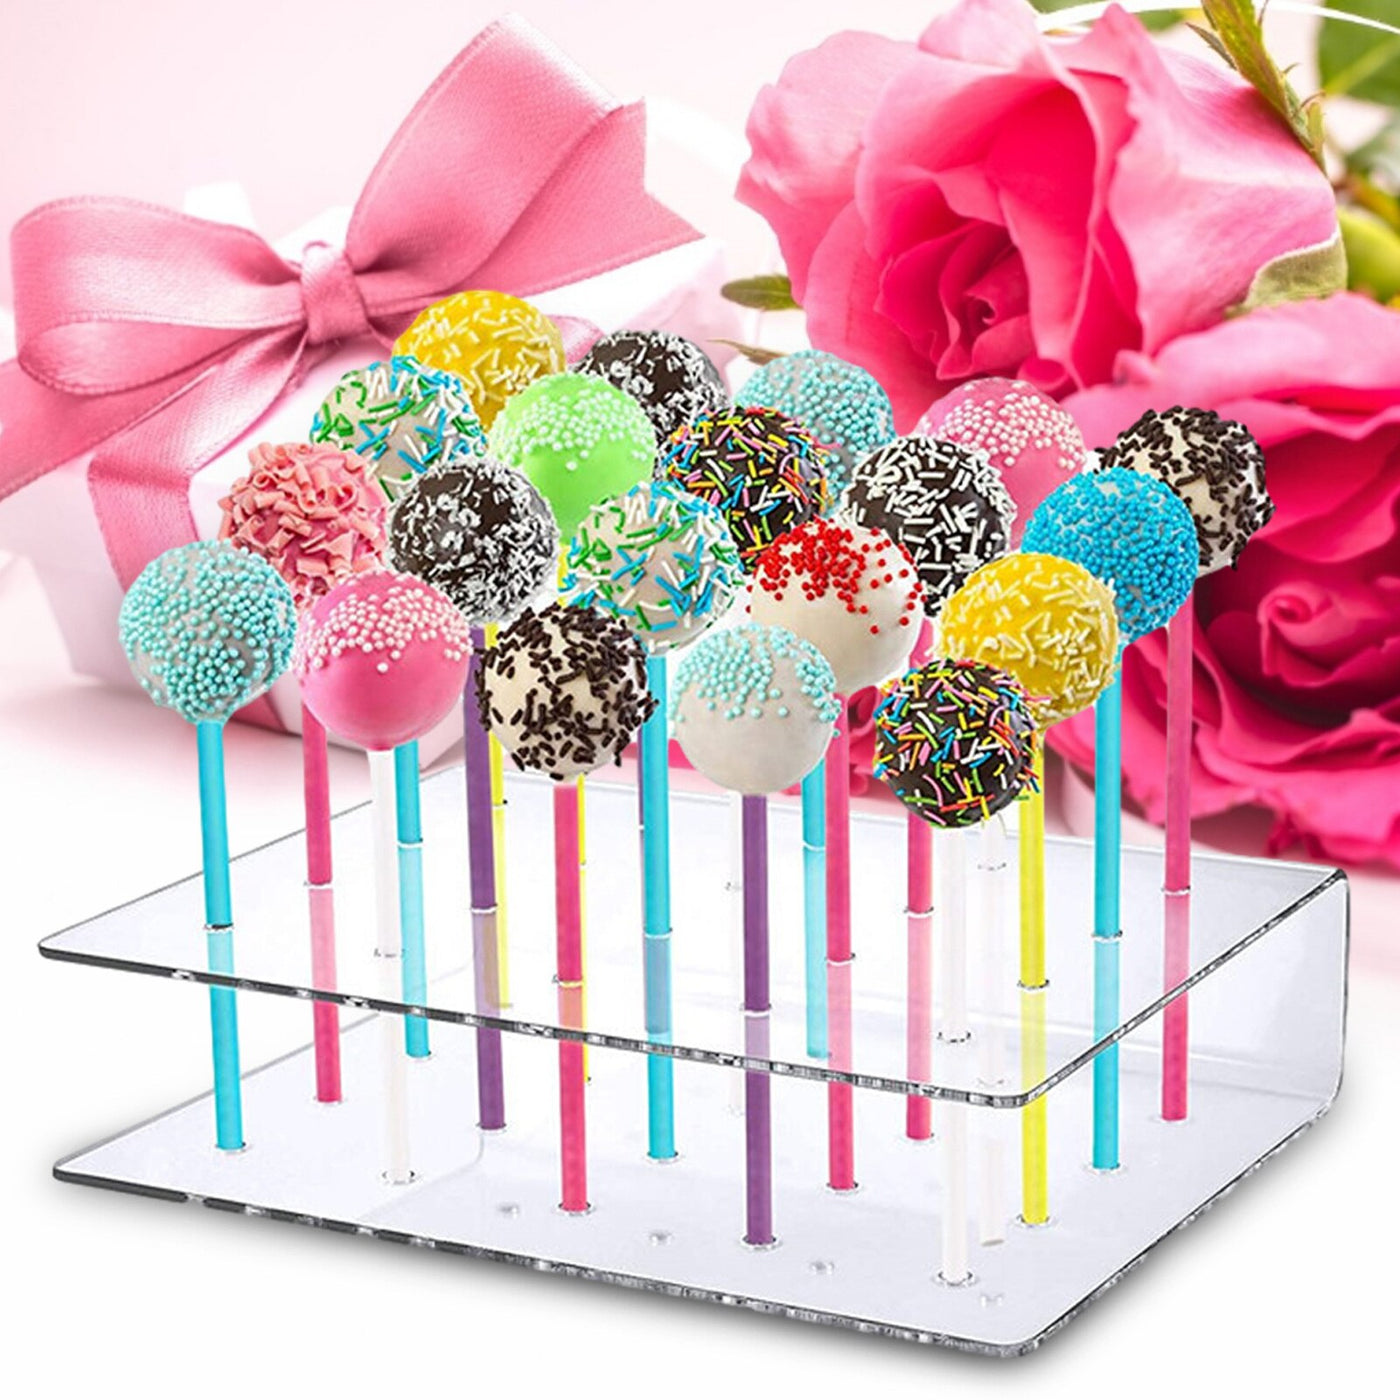 Cake Pop Stand for 20 POPS!